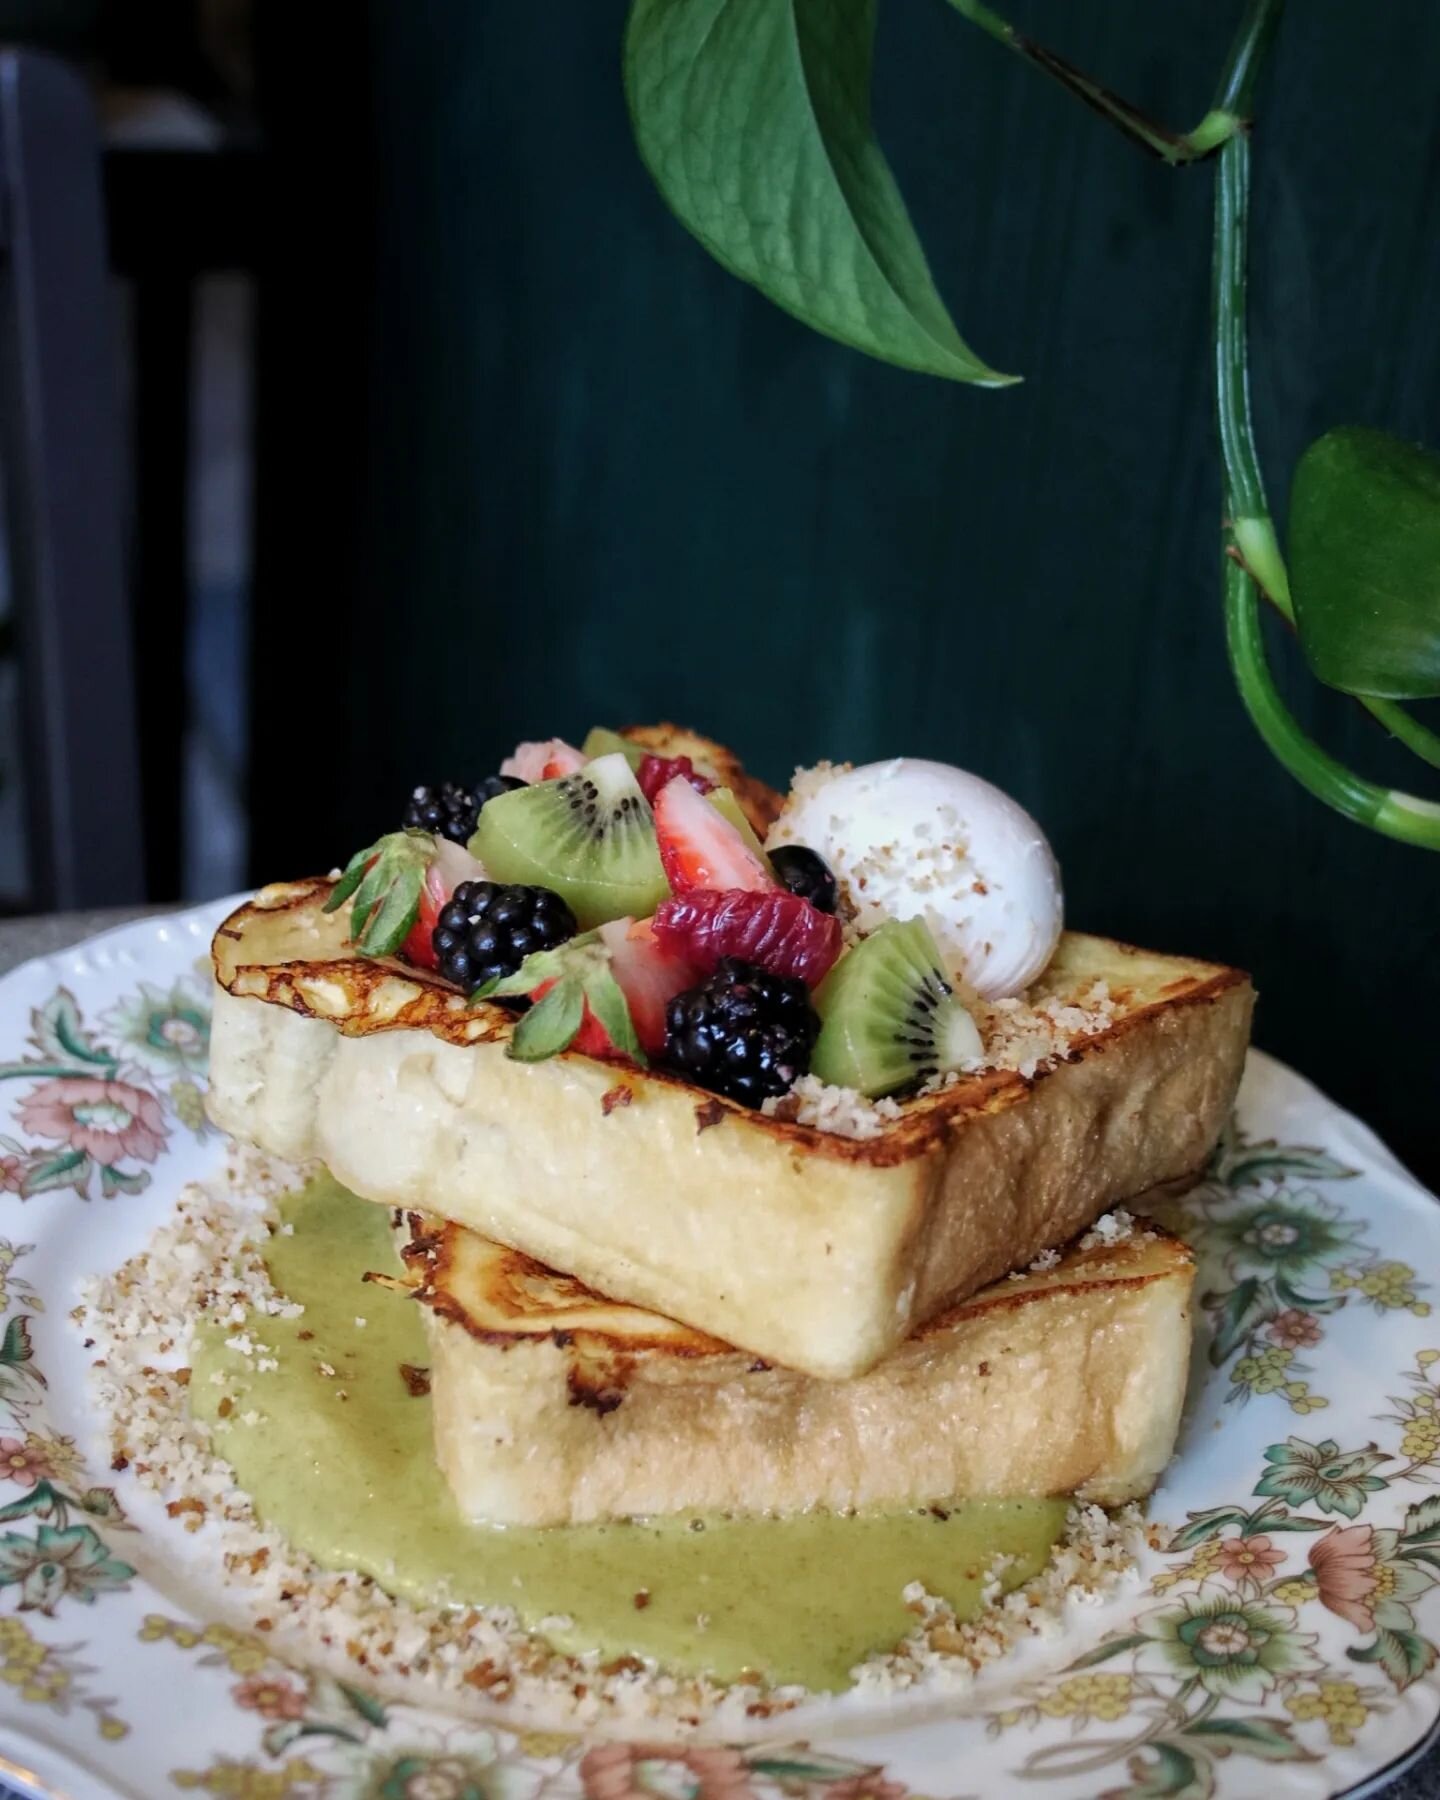 Bringing a taste of Singapore to your breakfast table! 🌴🍞✨

My delightful Kaya French Toast is layered with fragrant housemade coconut pandan jam, thick cut toast, and topped with fresh fruit and a perfectly poached egg.

✨ Don't forget to check ou